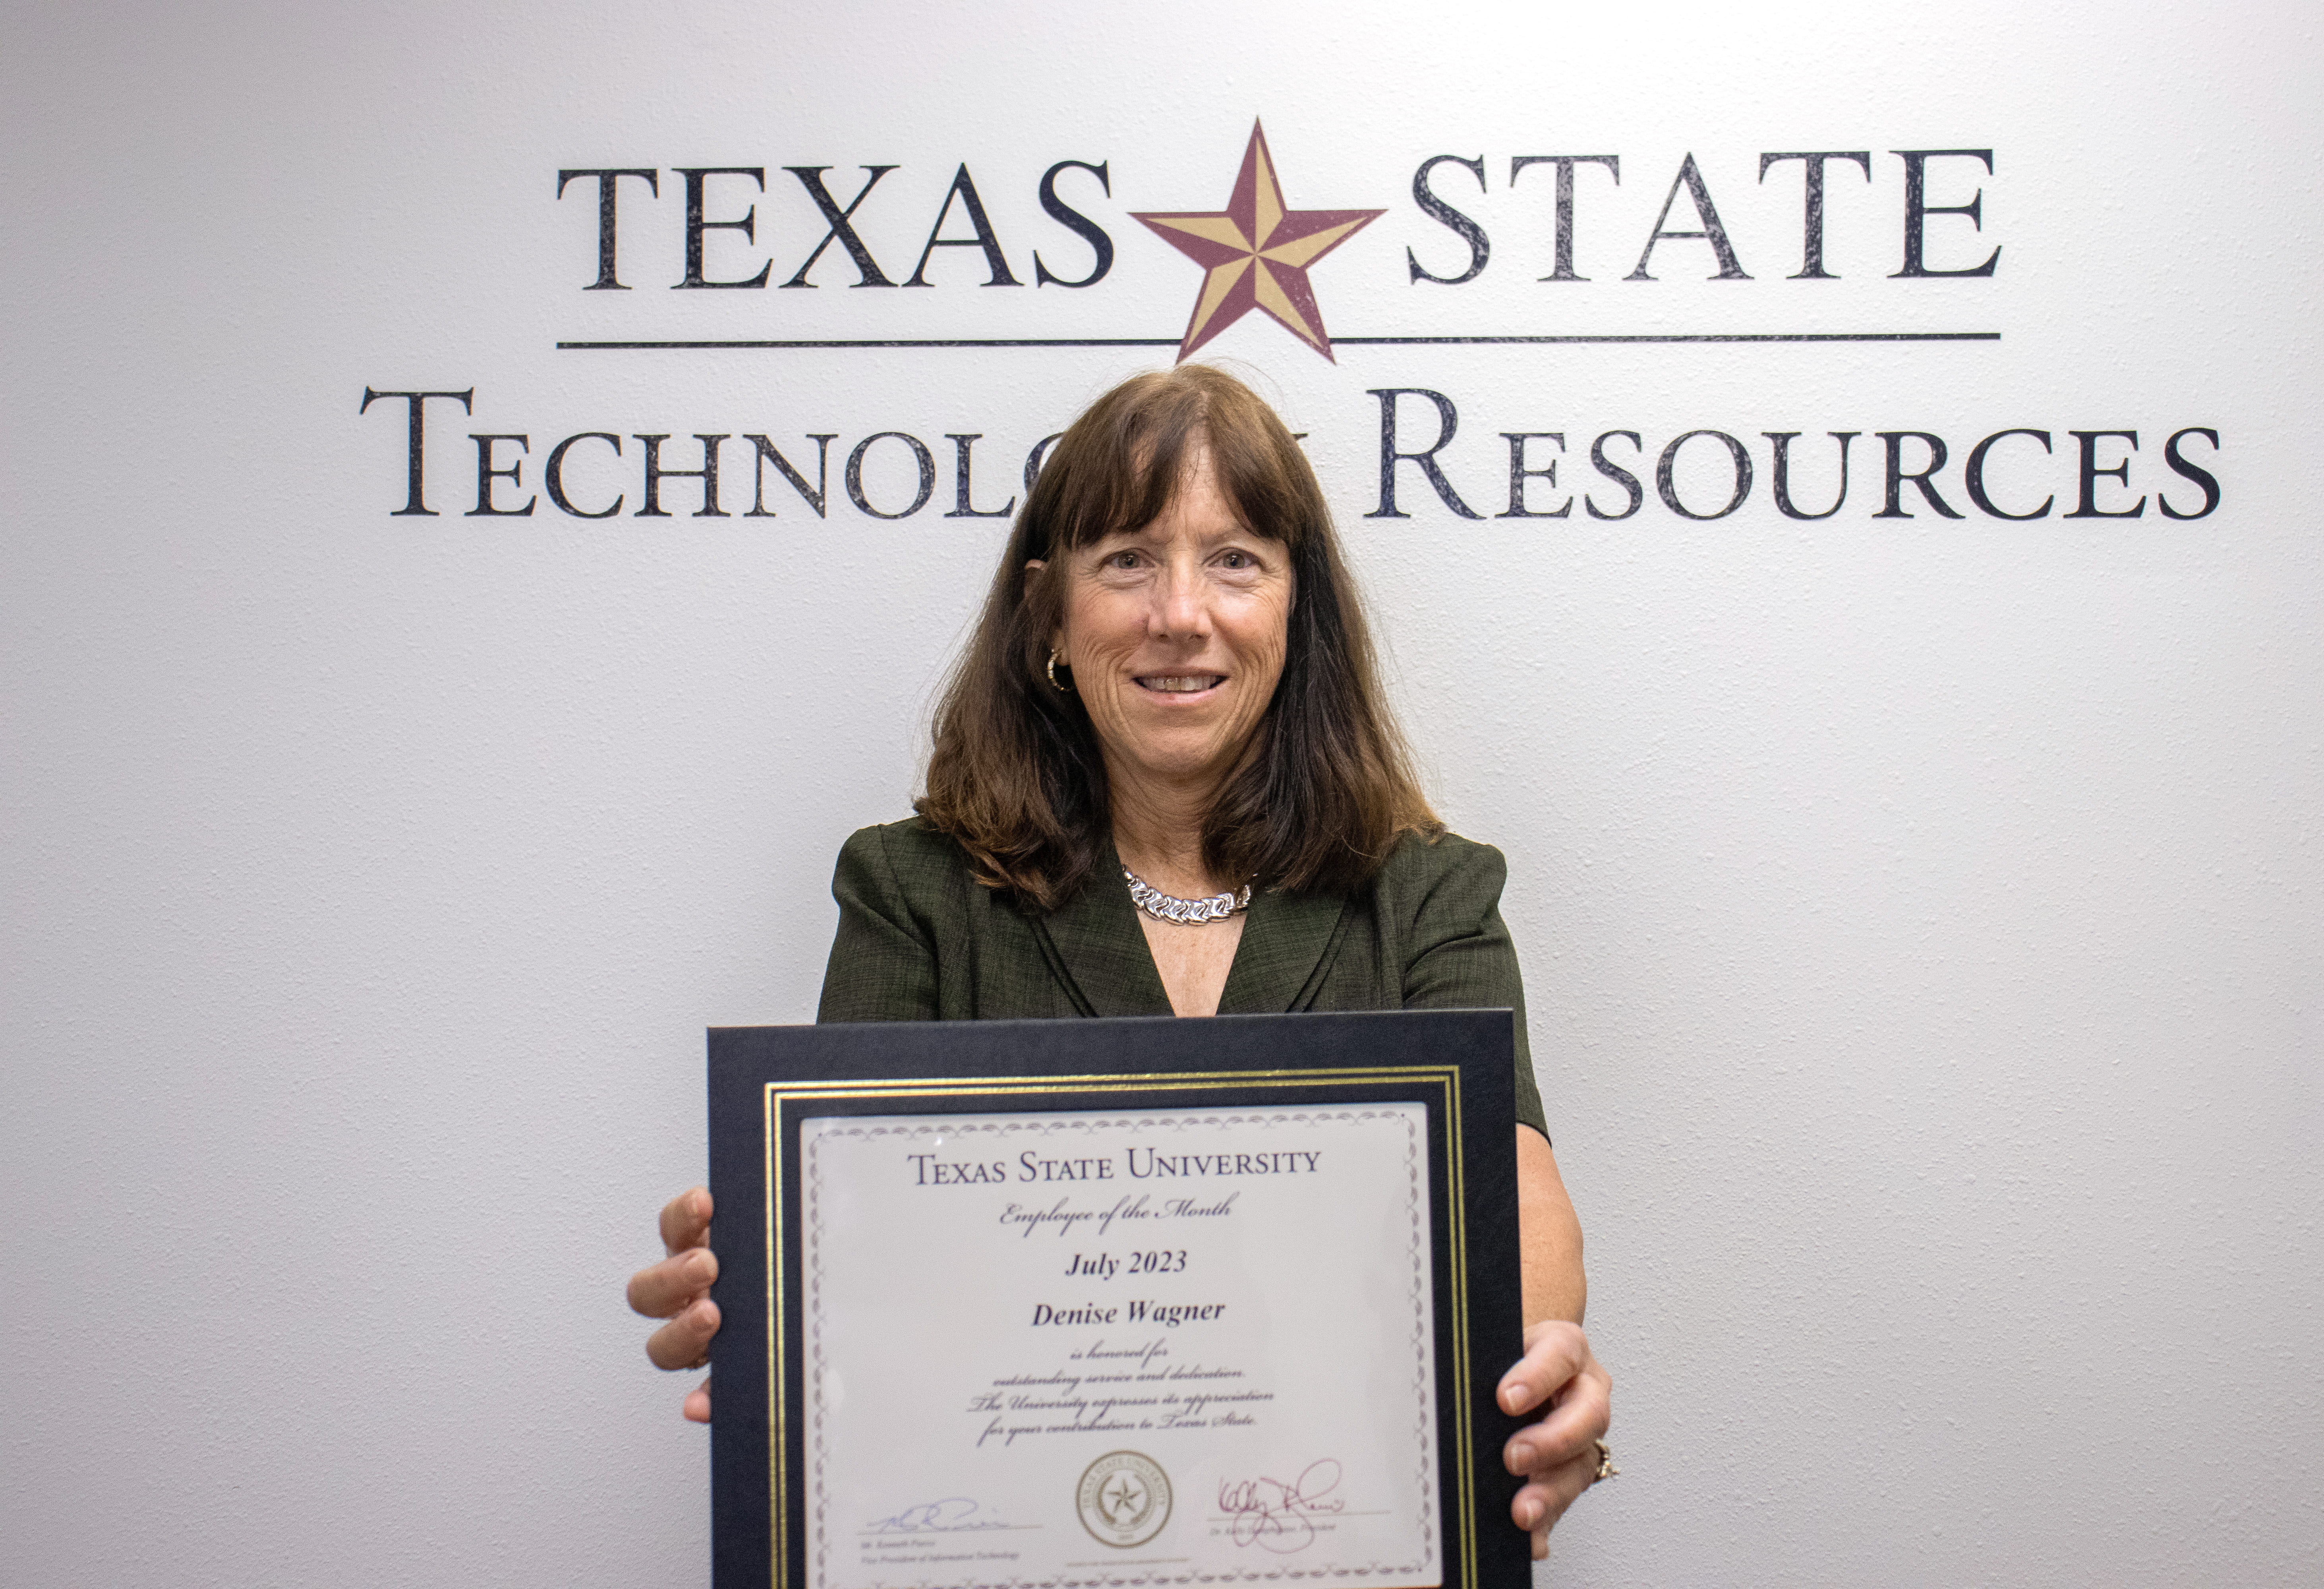 Denise Wagner holding a certificate